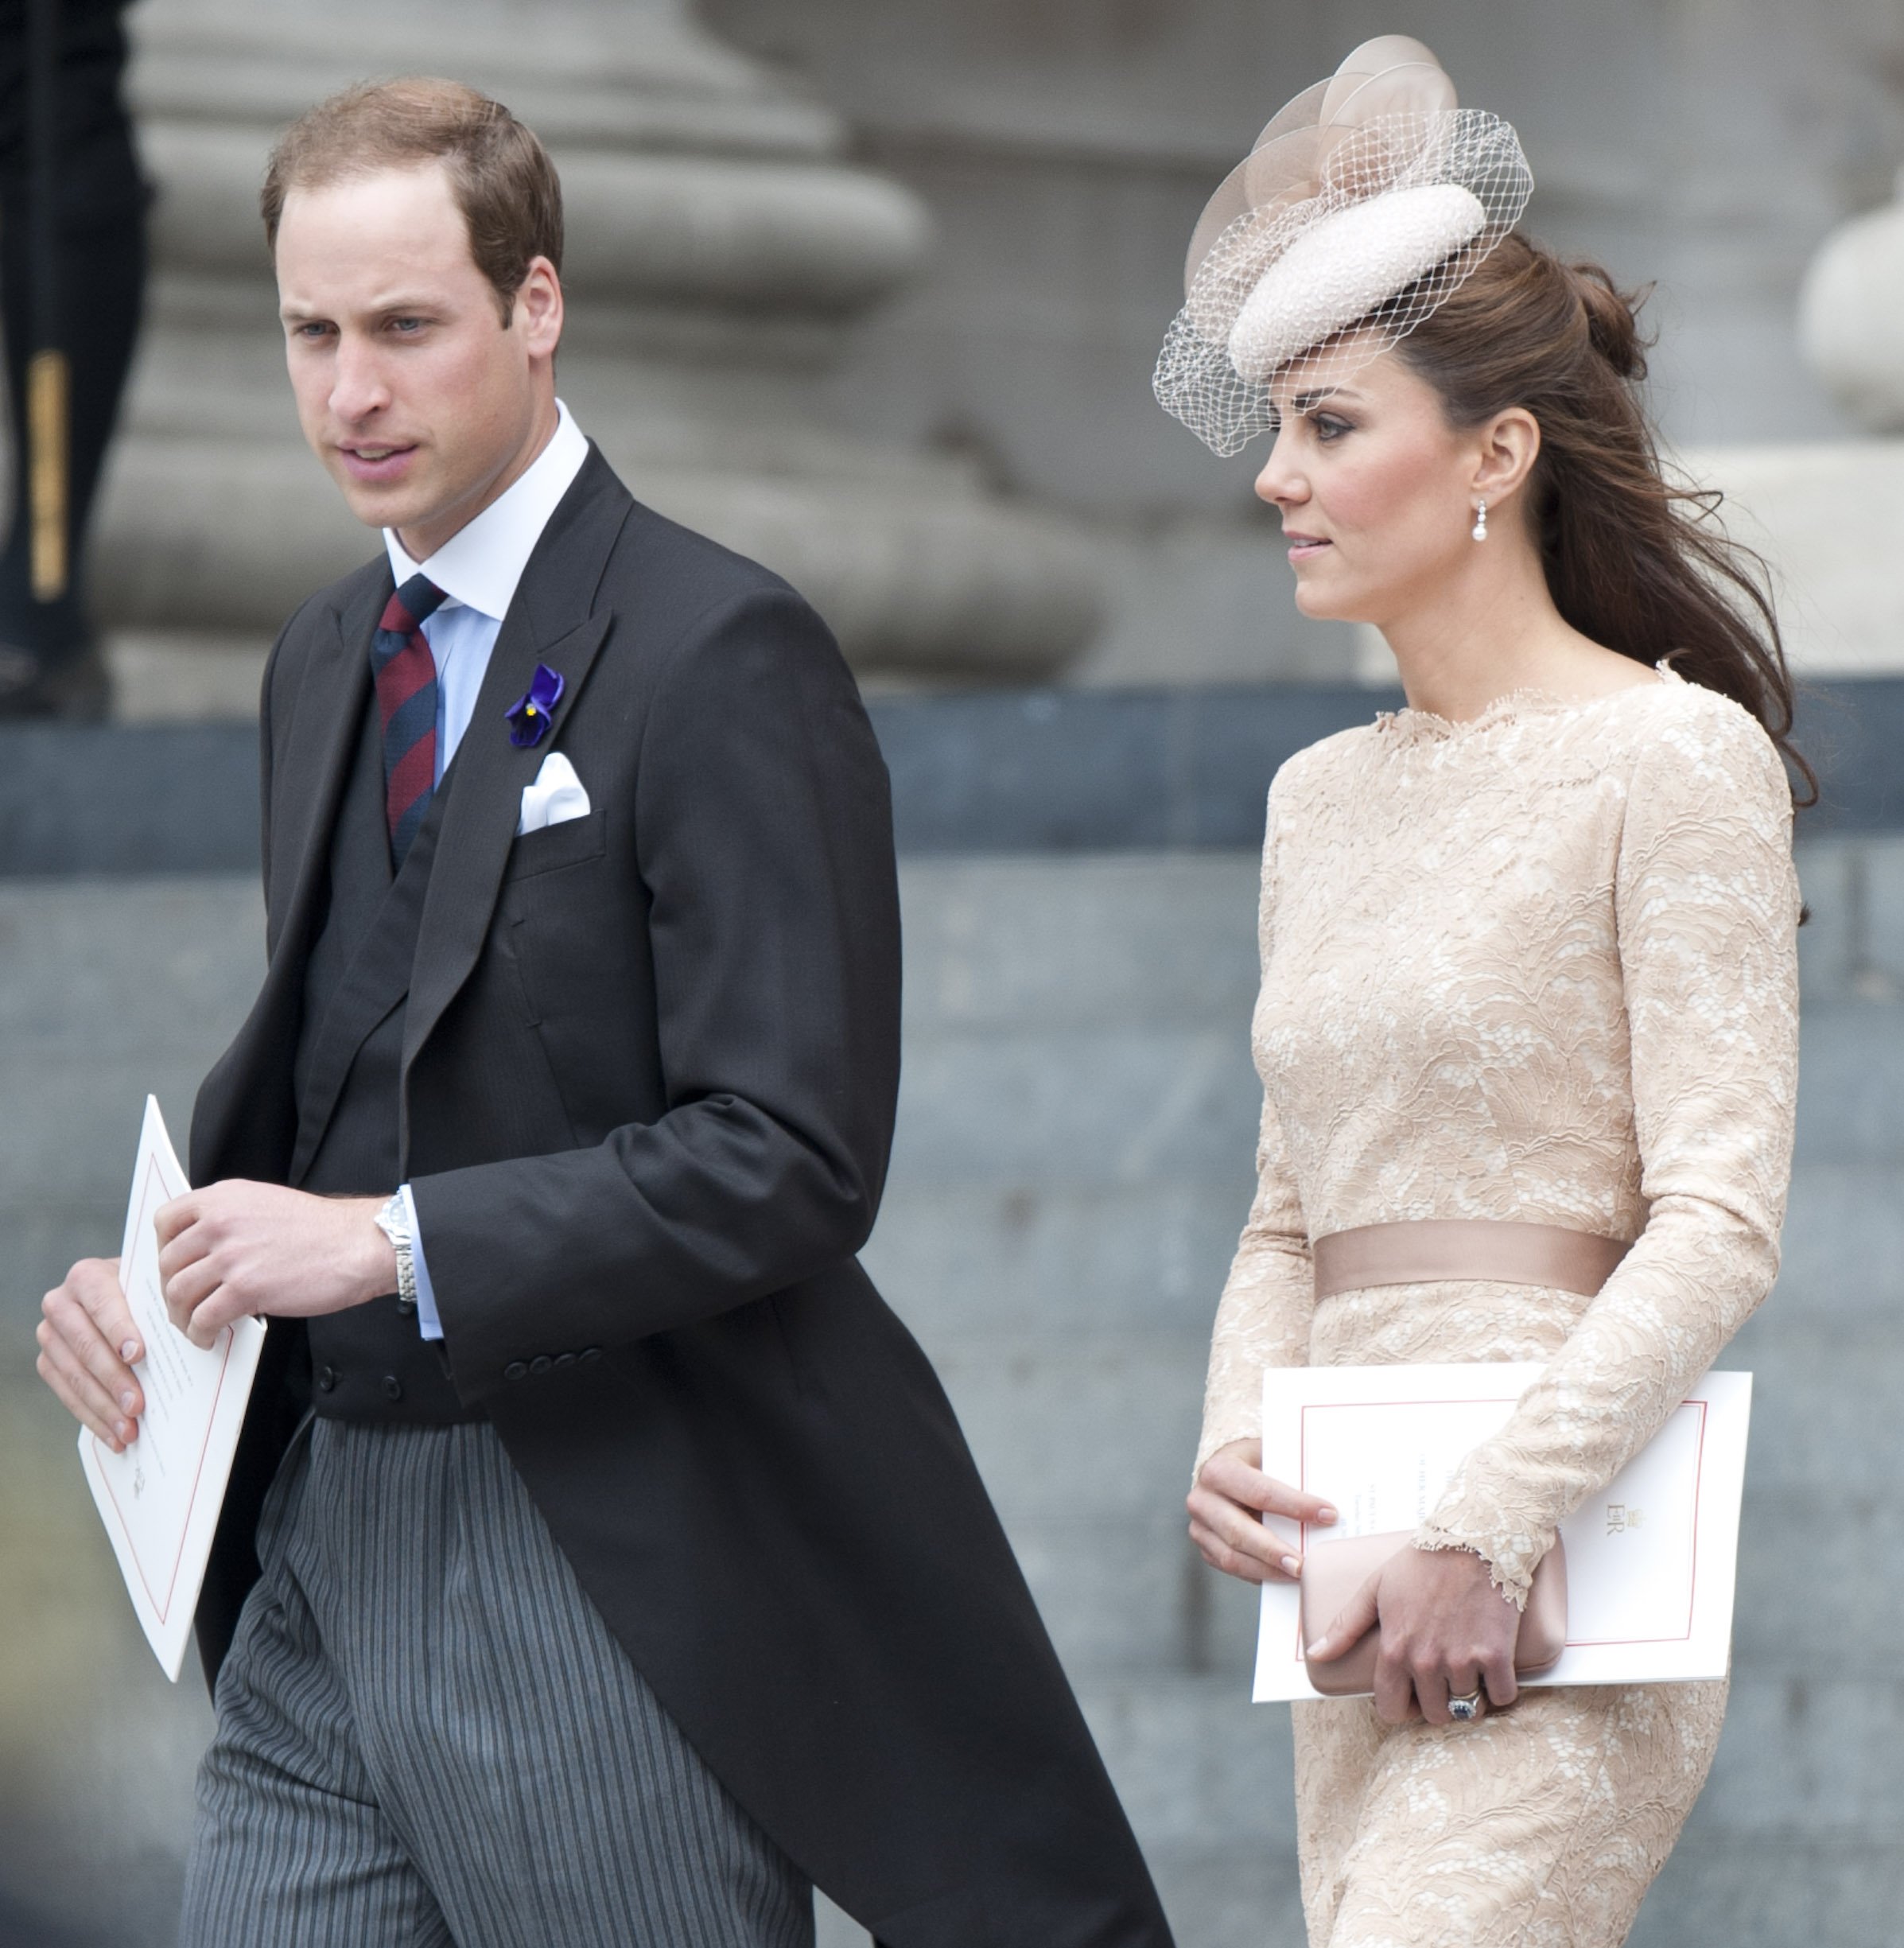 Prince William And Catherine, Duchess Of Cambridge Attending A National Service Of Thanksgiving At St Paul's Cathedral In London As Part Of The Diamond Jubilee Celebrations. | Source: Getty Images